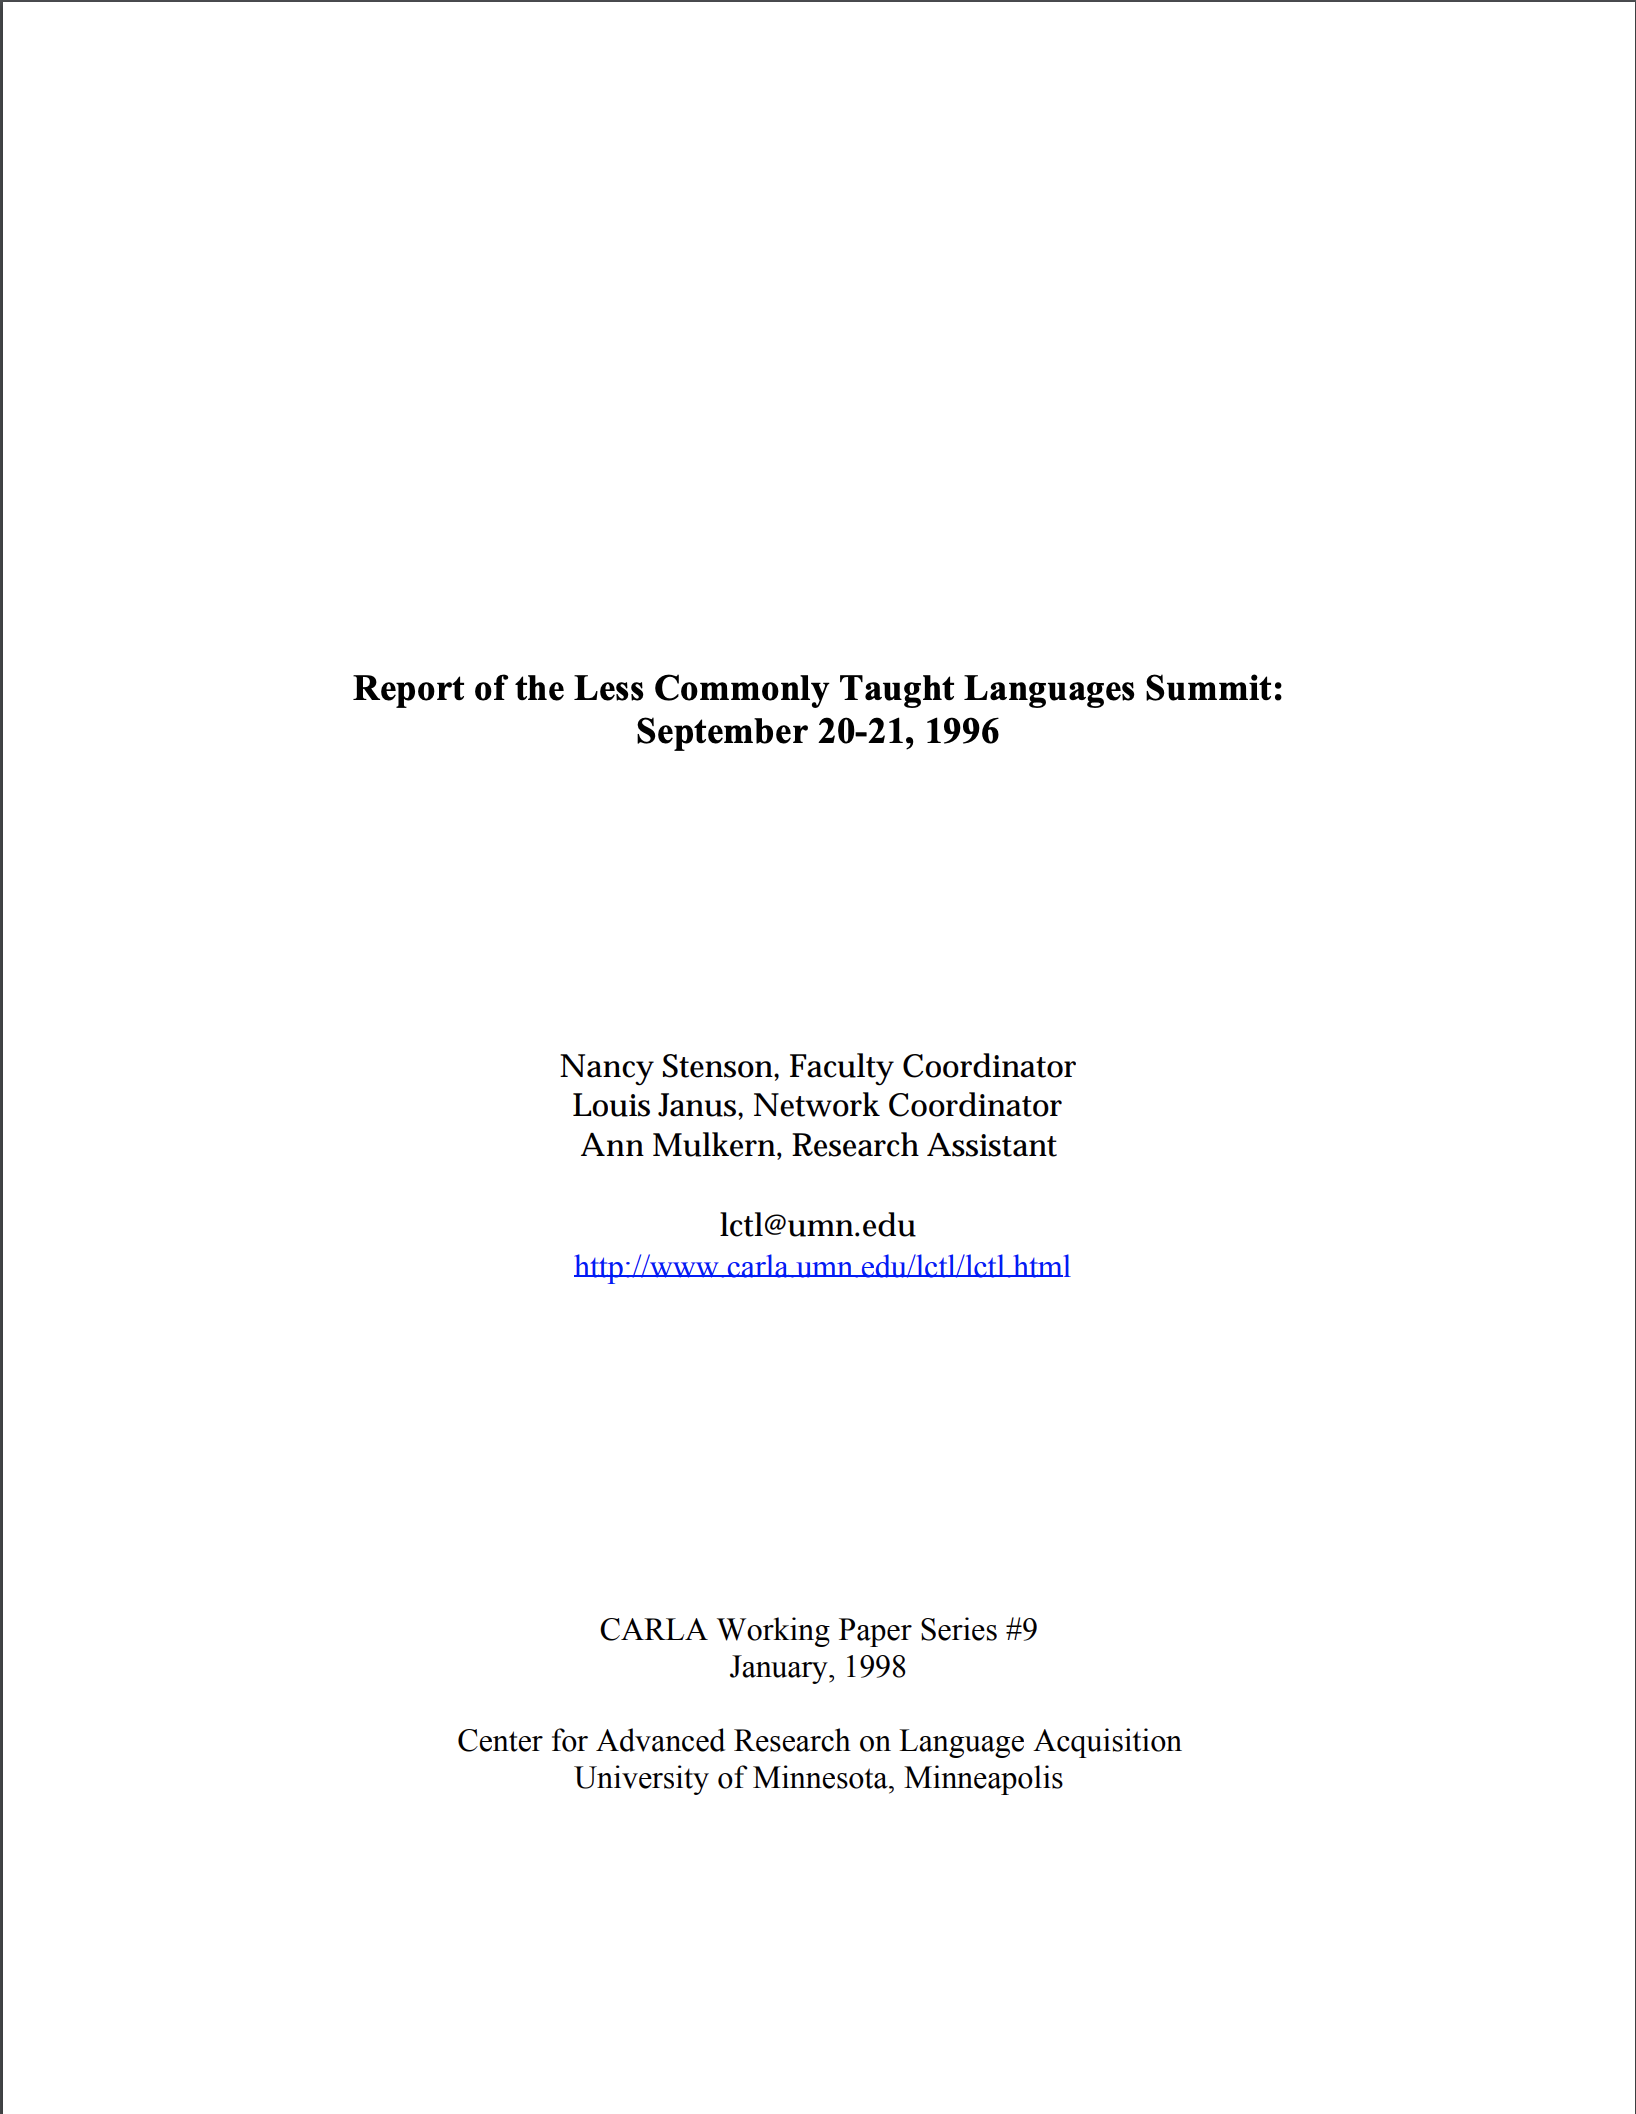 Report of the LCTL Summit: 1996